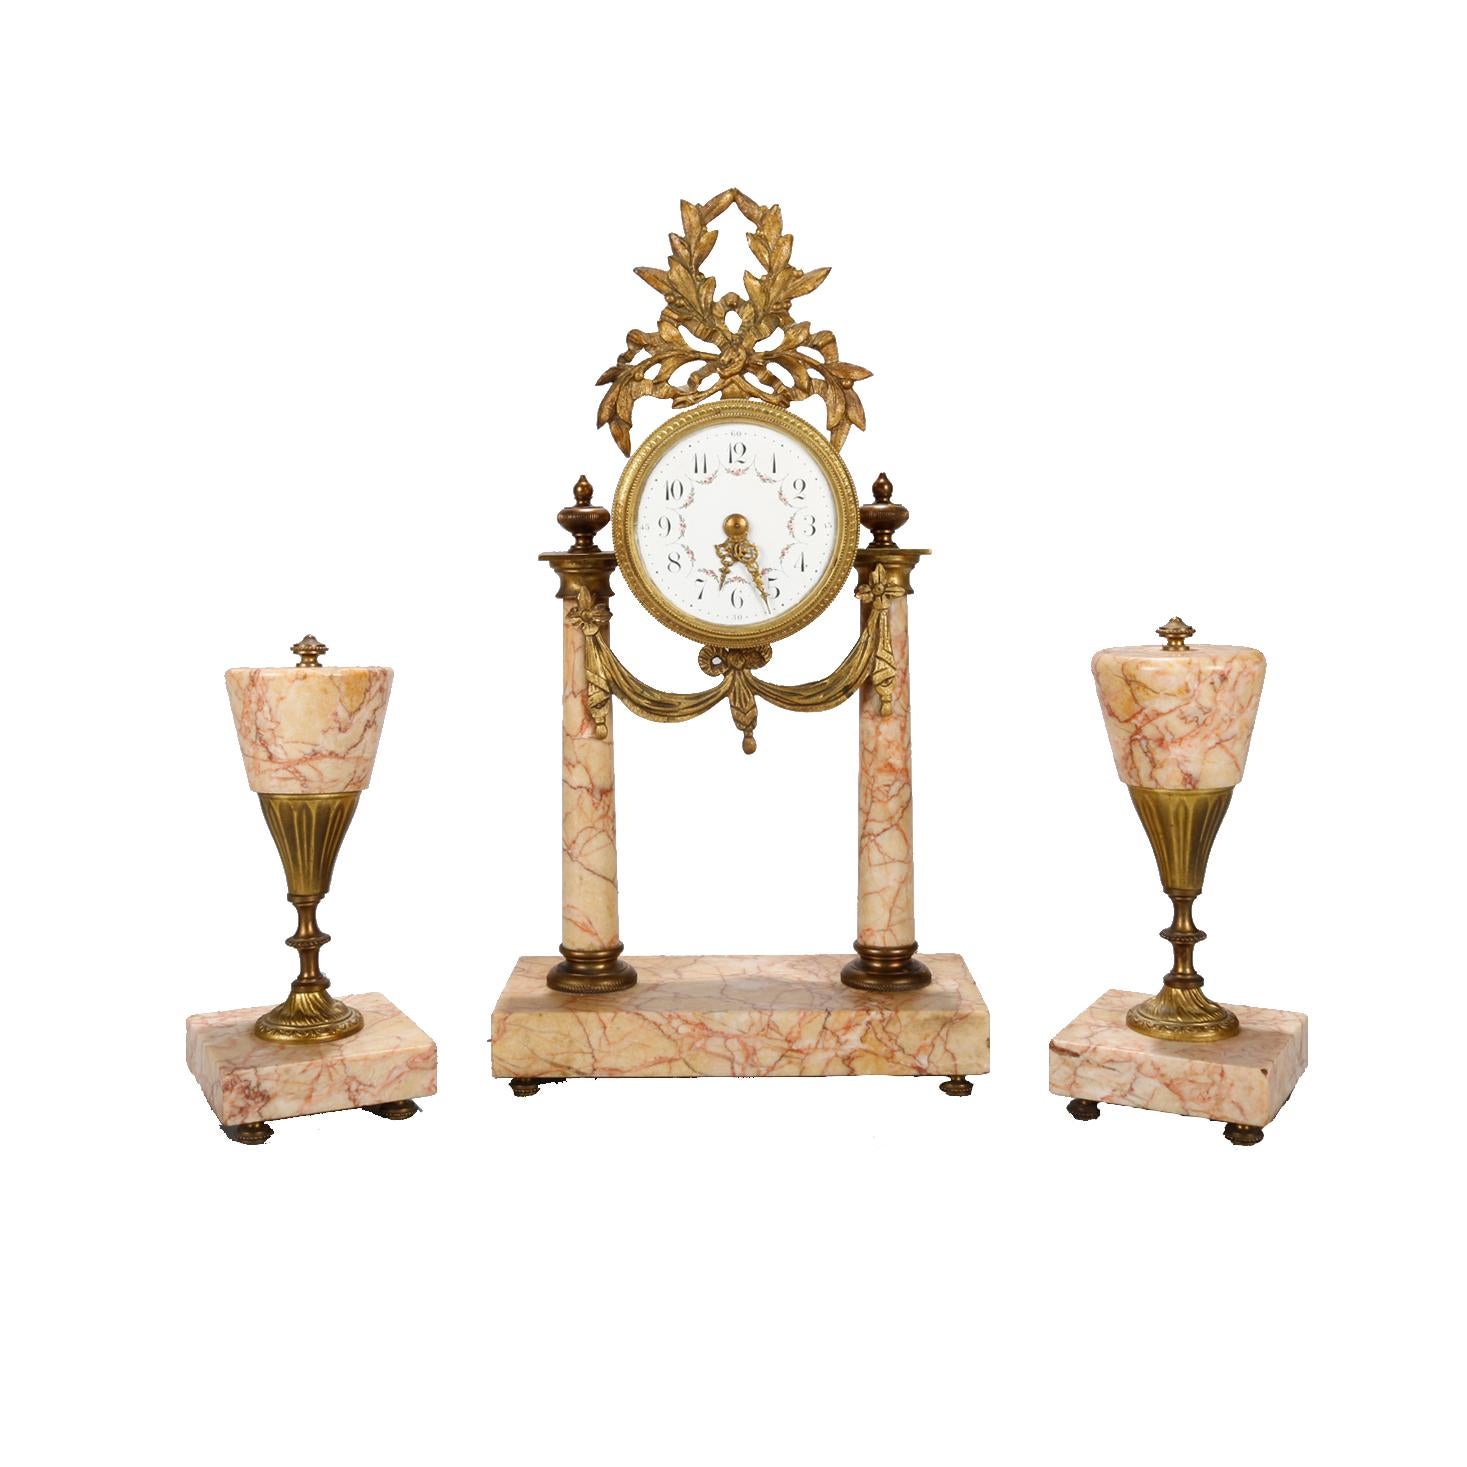 An antique French Louis XVI garniture set offers central clock having foliate cast bronze crest over works having flanking rouge marble column supports with cast bronze draped swag and two complementing rouge marble stylized torchieres, bronze